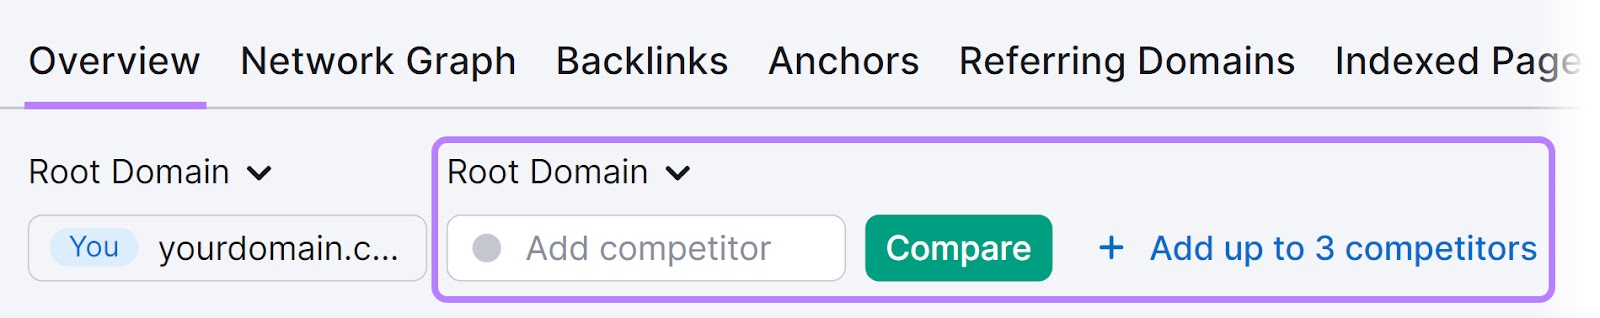 Add competitors's domains in the upper part of the “Overview” dashboard